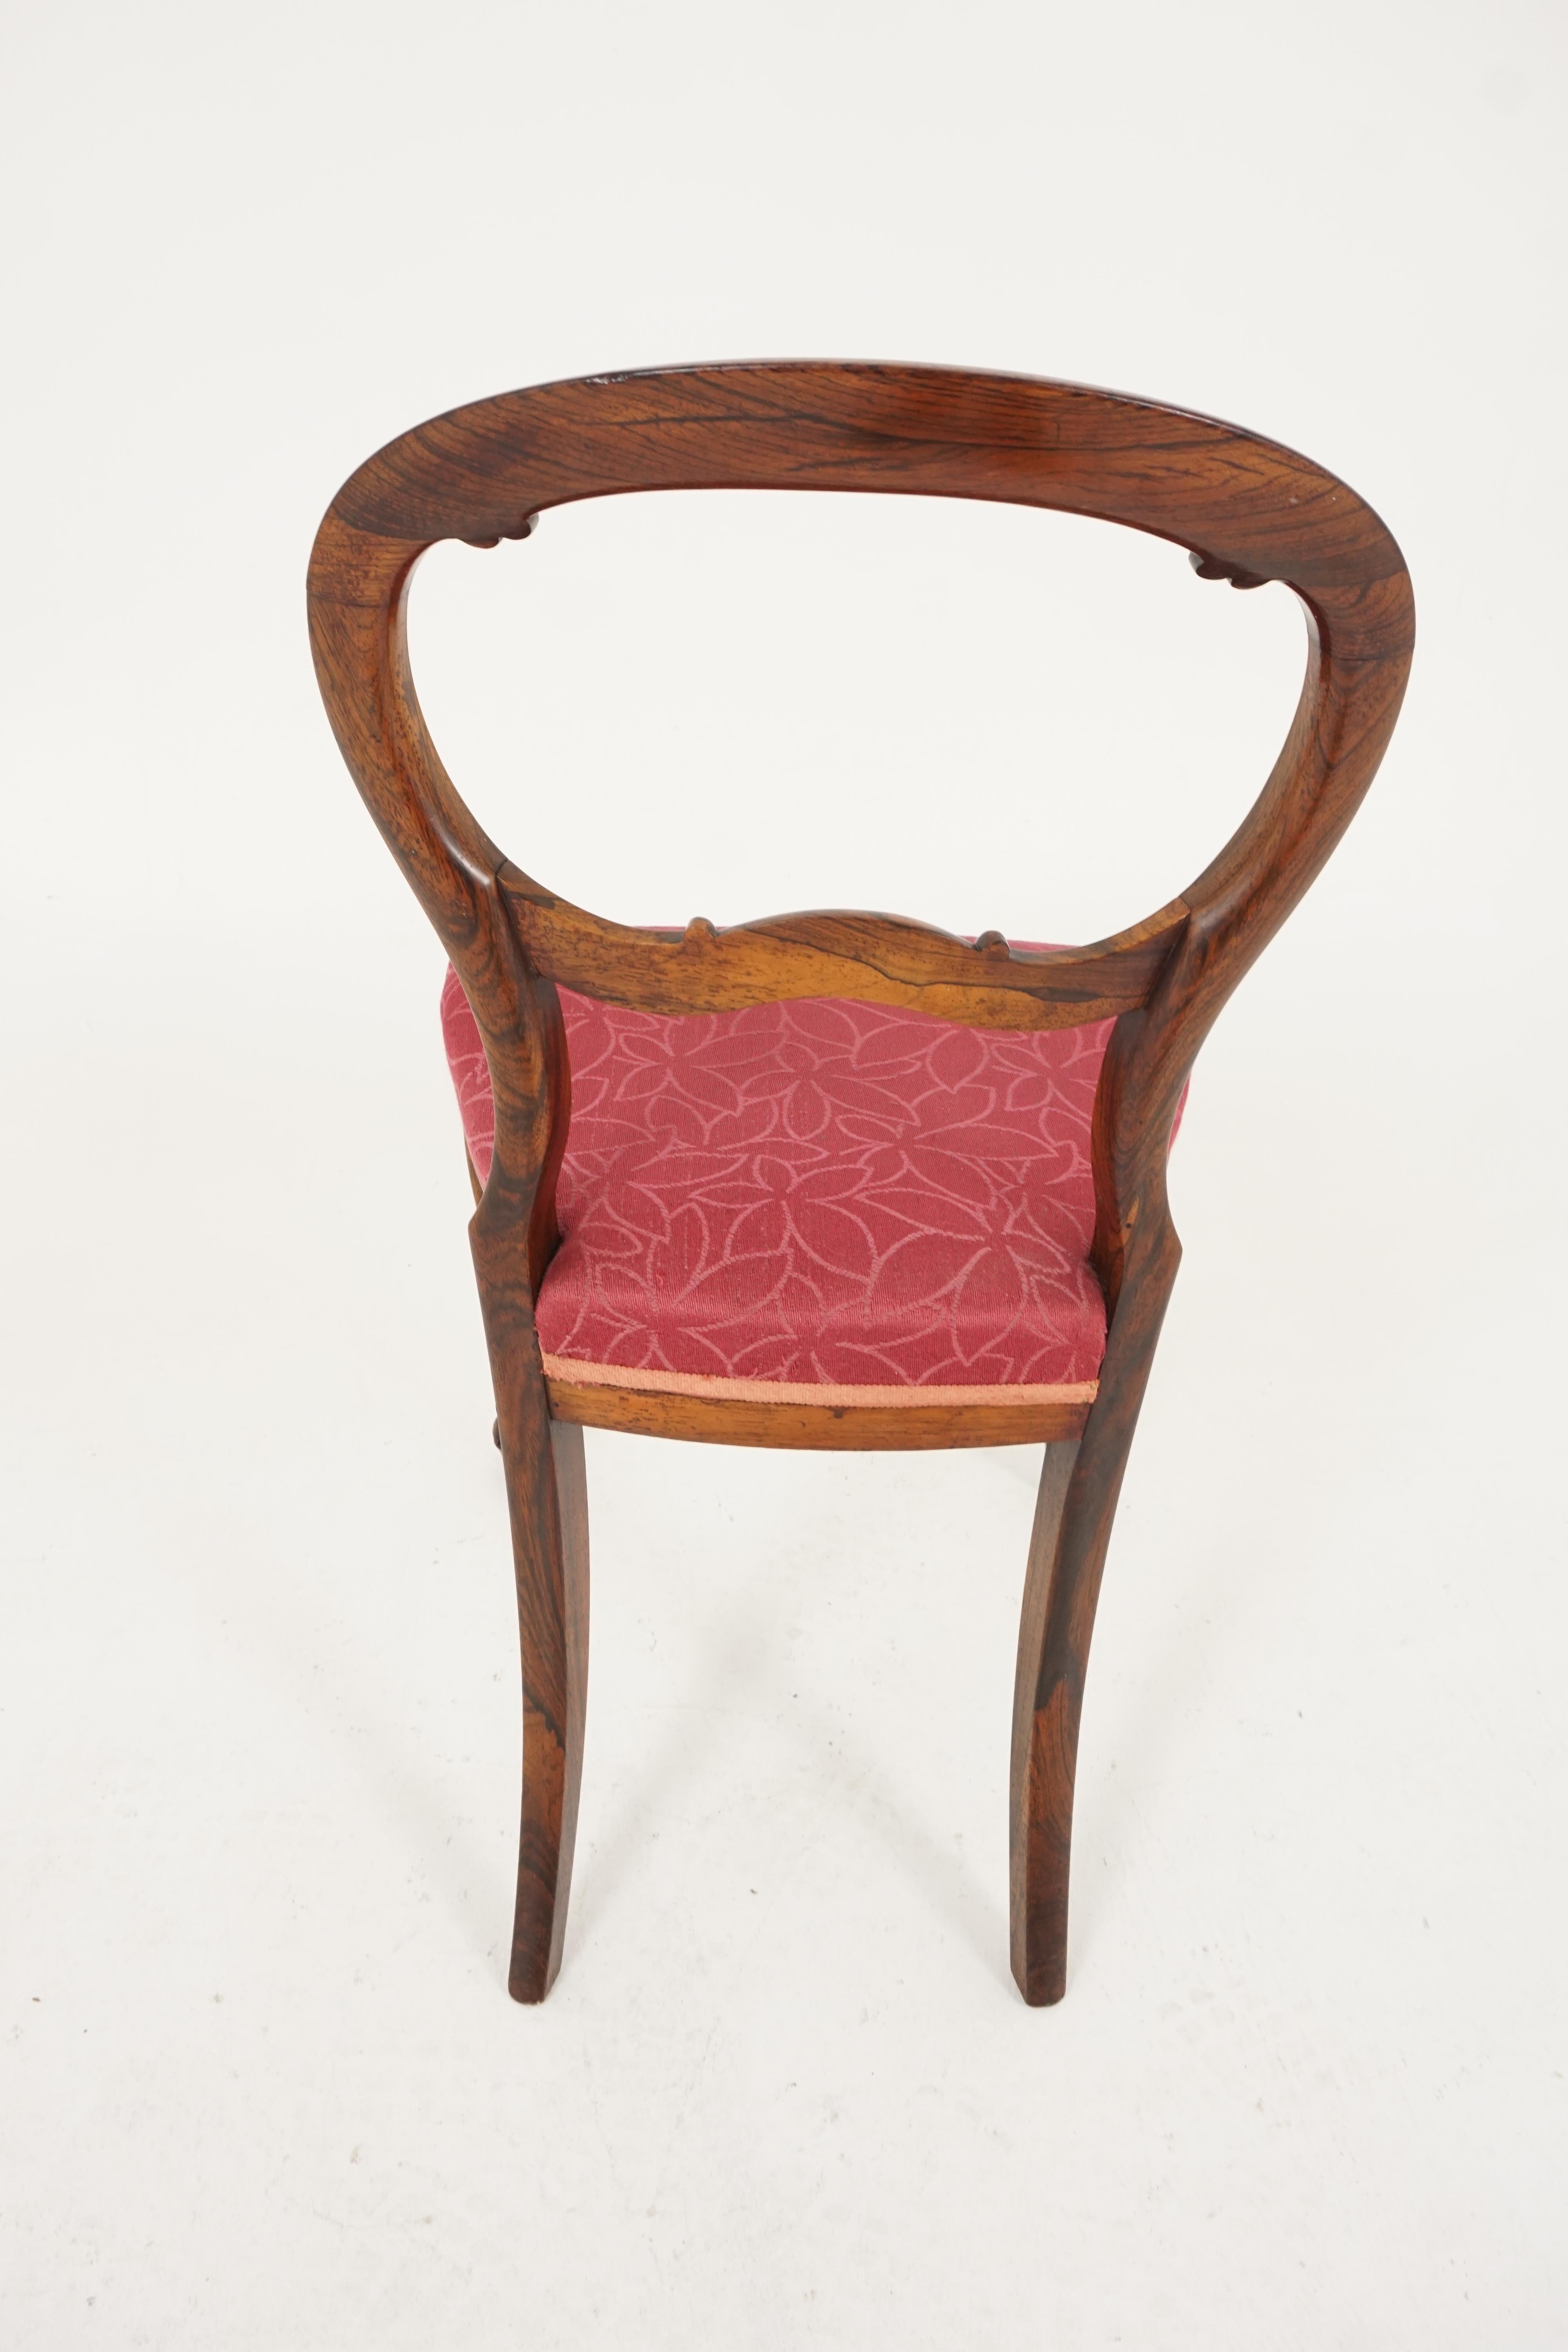 Hand-Crafted 4 Antique Victorian Rosewood Balloon Back Dining Chairs, Scotland 1870, B2161